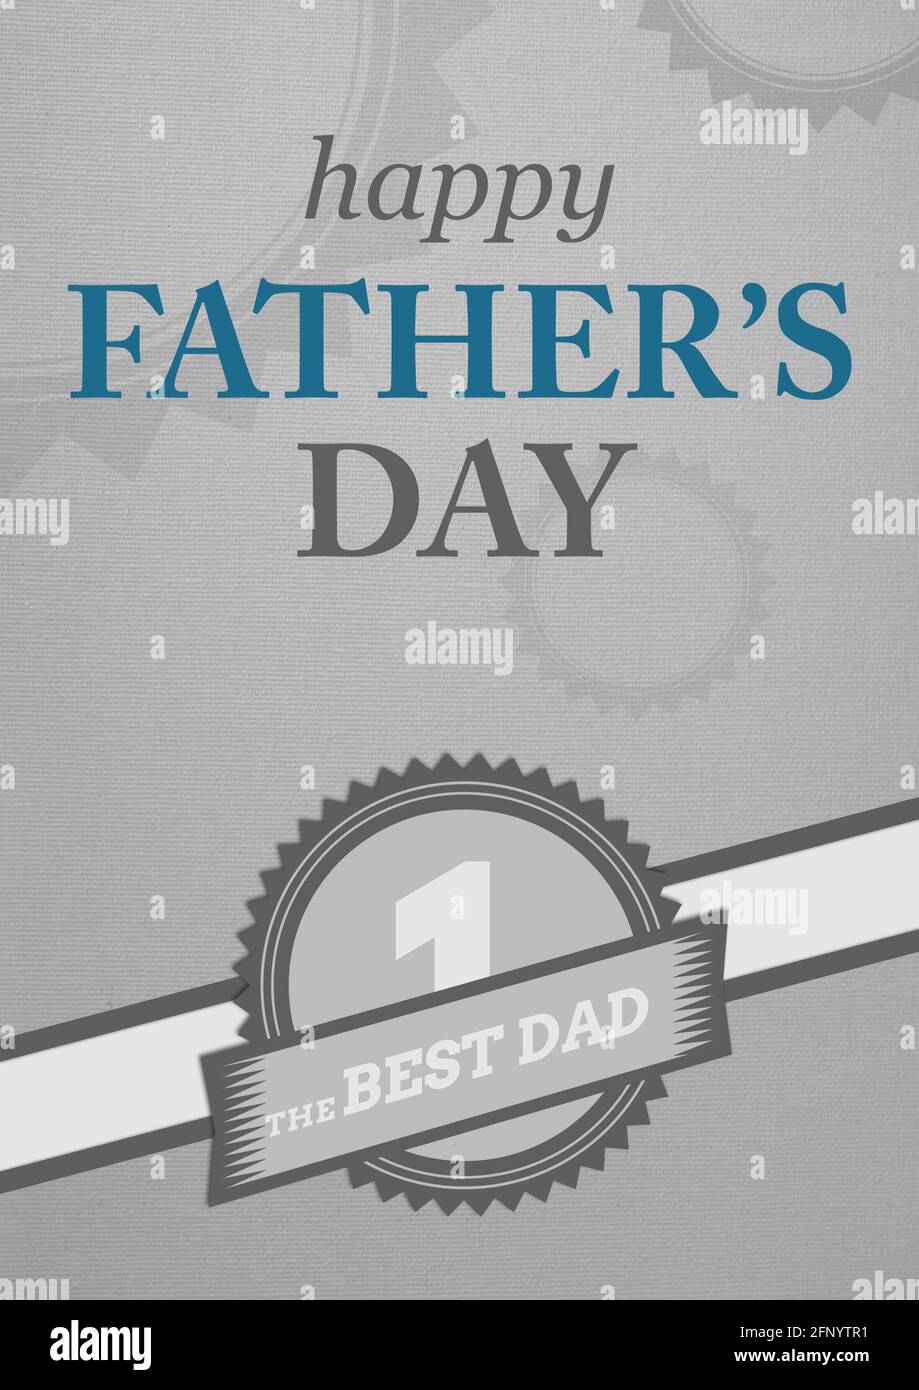 Composition of happy father's day text and the best dad badge on grey background Stock Photo